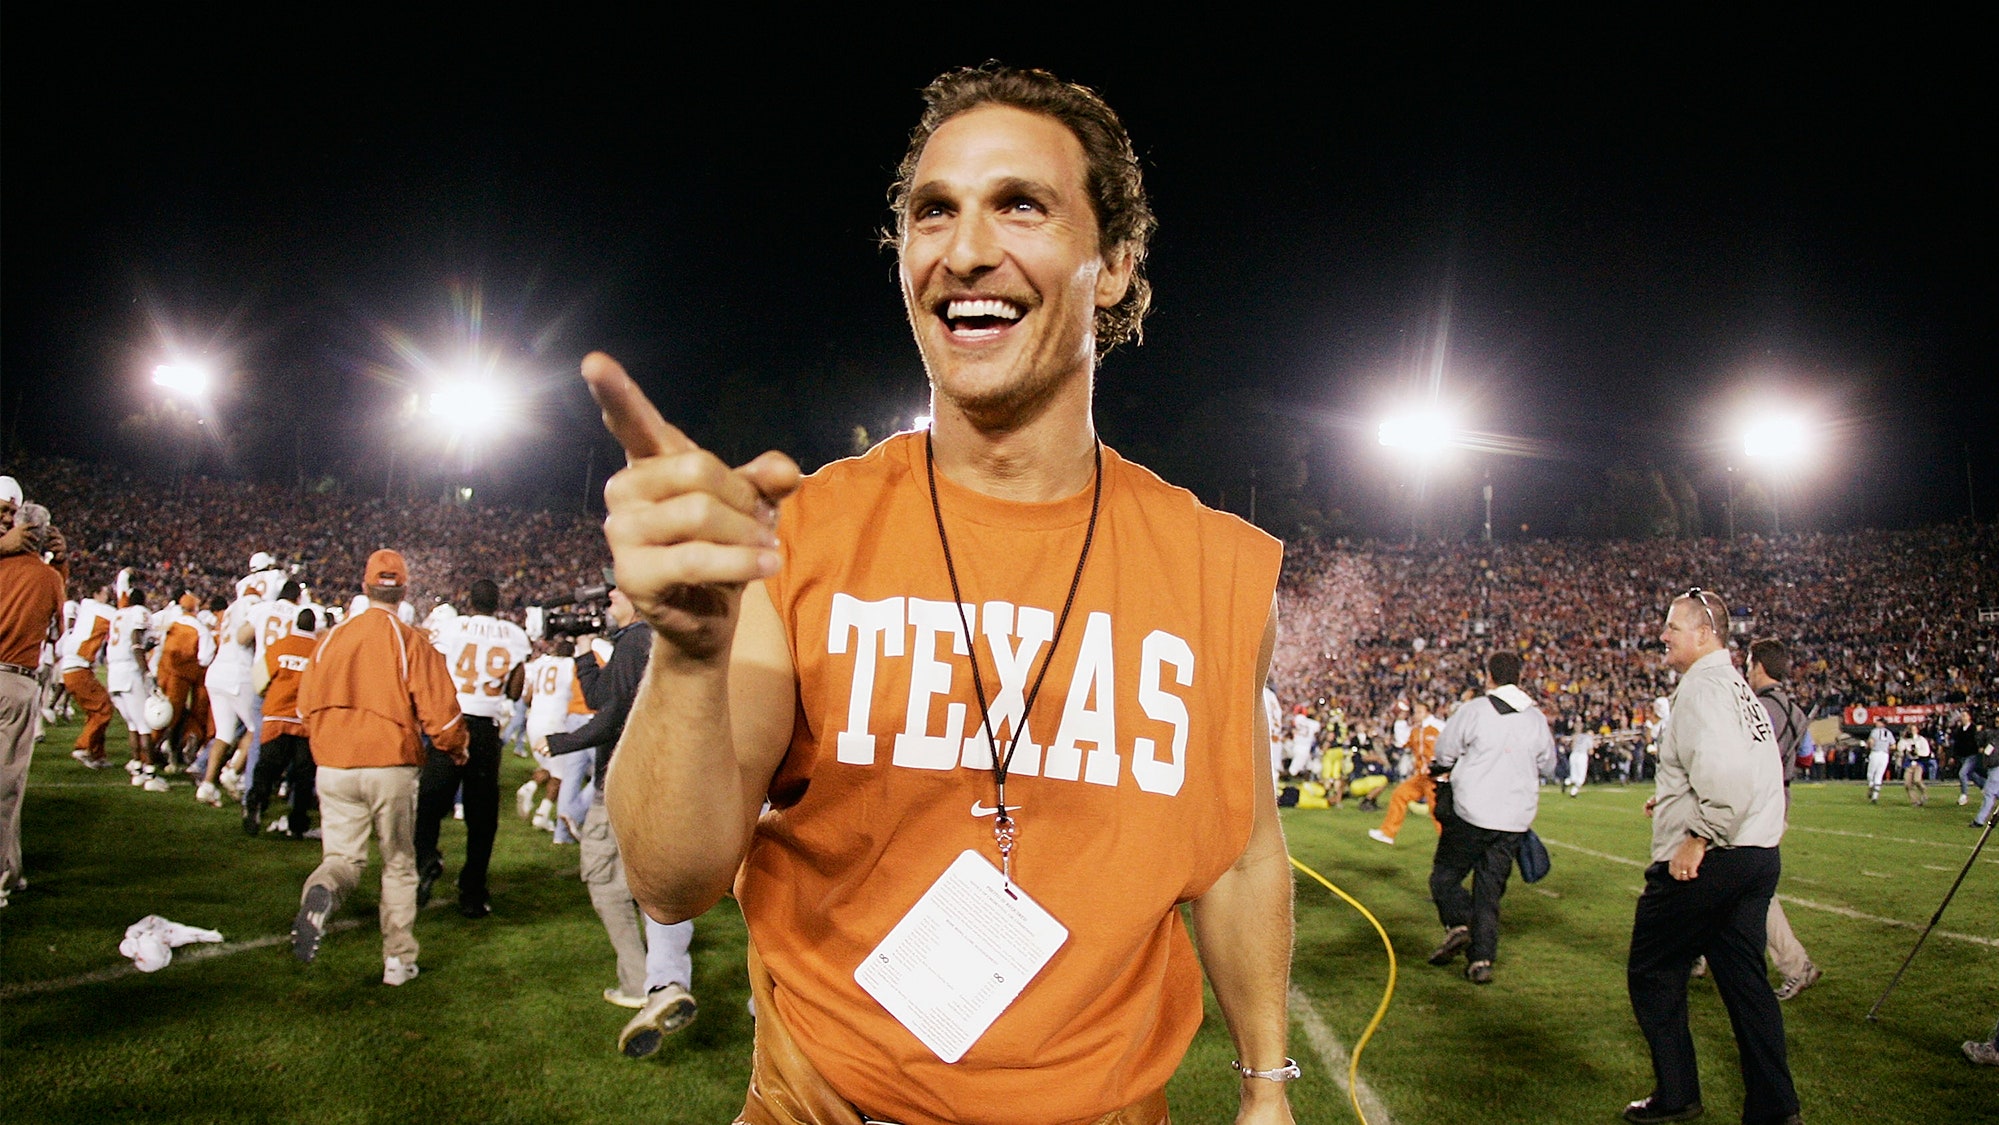 Matthew McConaughey is the top contender for governor – 45% of Texans would vote for him!